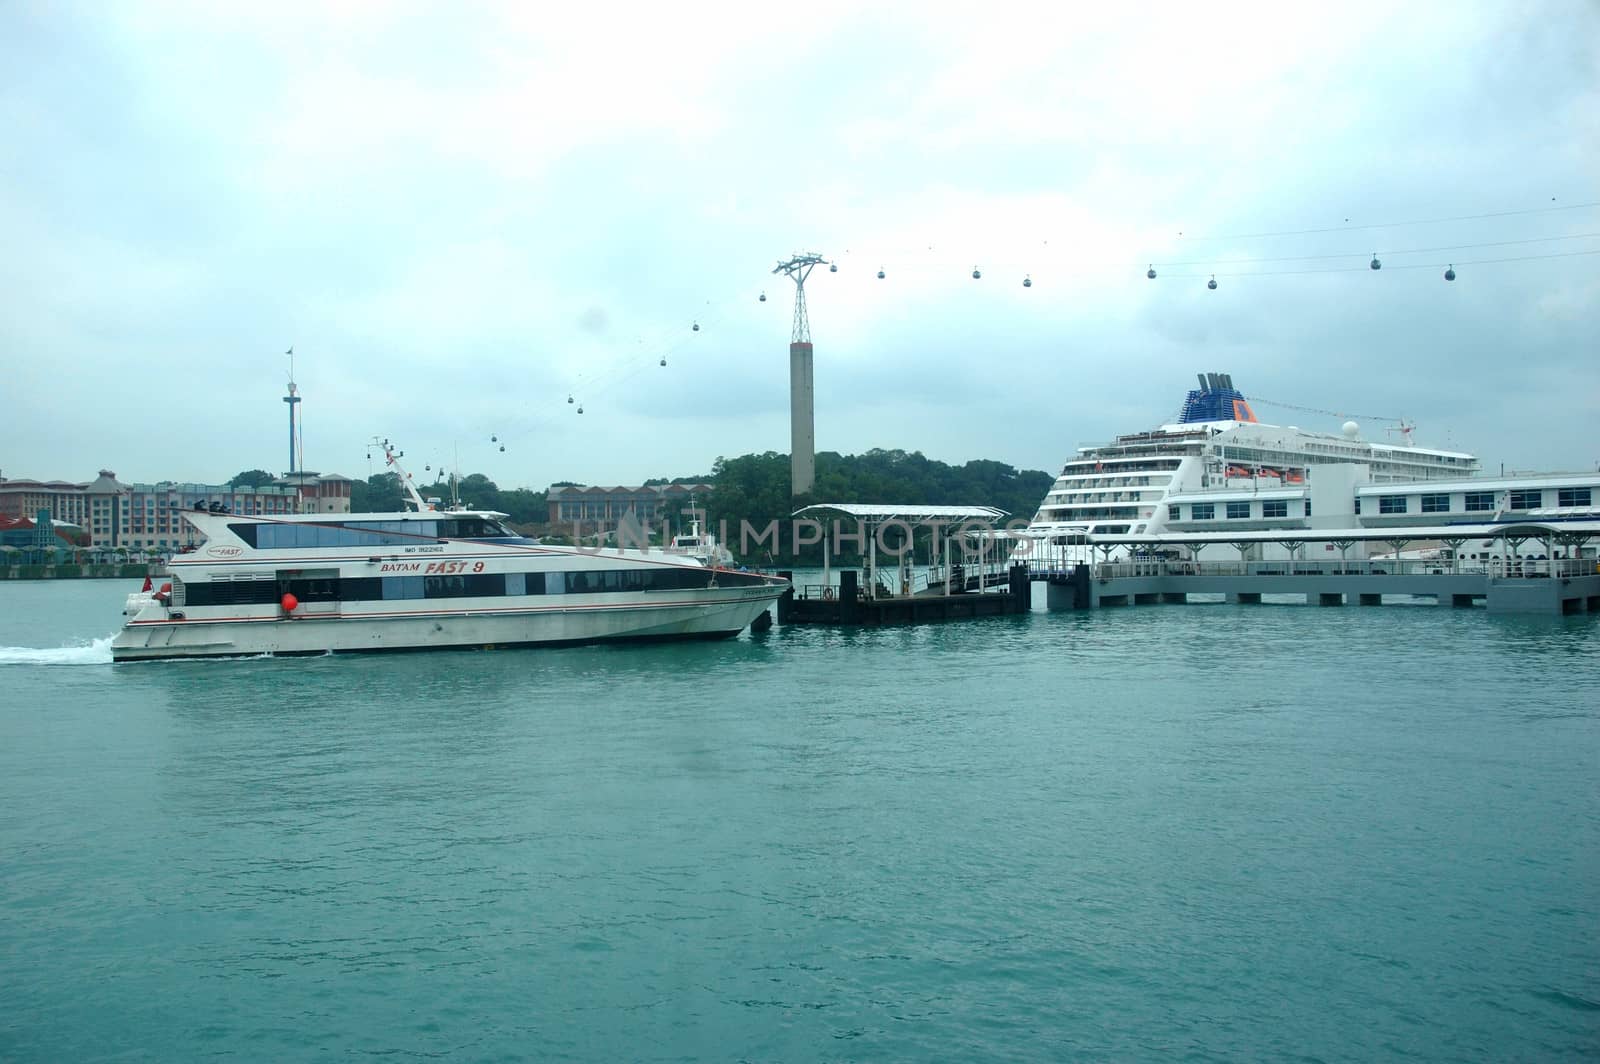 Harbour Front, Singapore - January 18, 2014: Scenery of cruise and boat harbour at Harbour Front, Singapore.